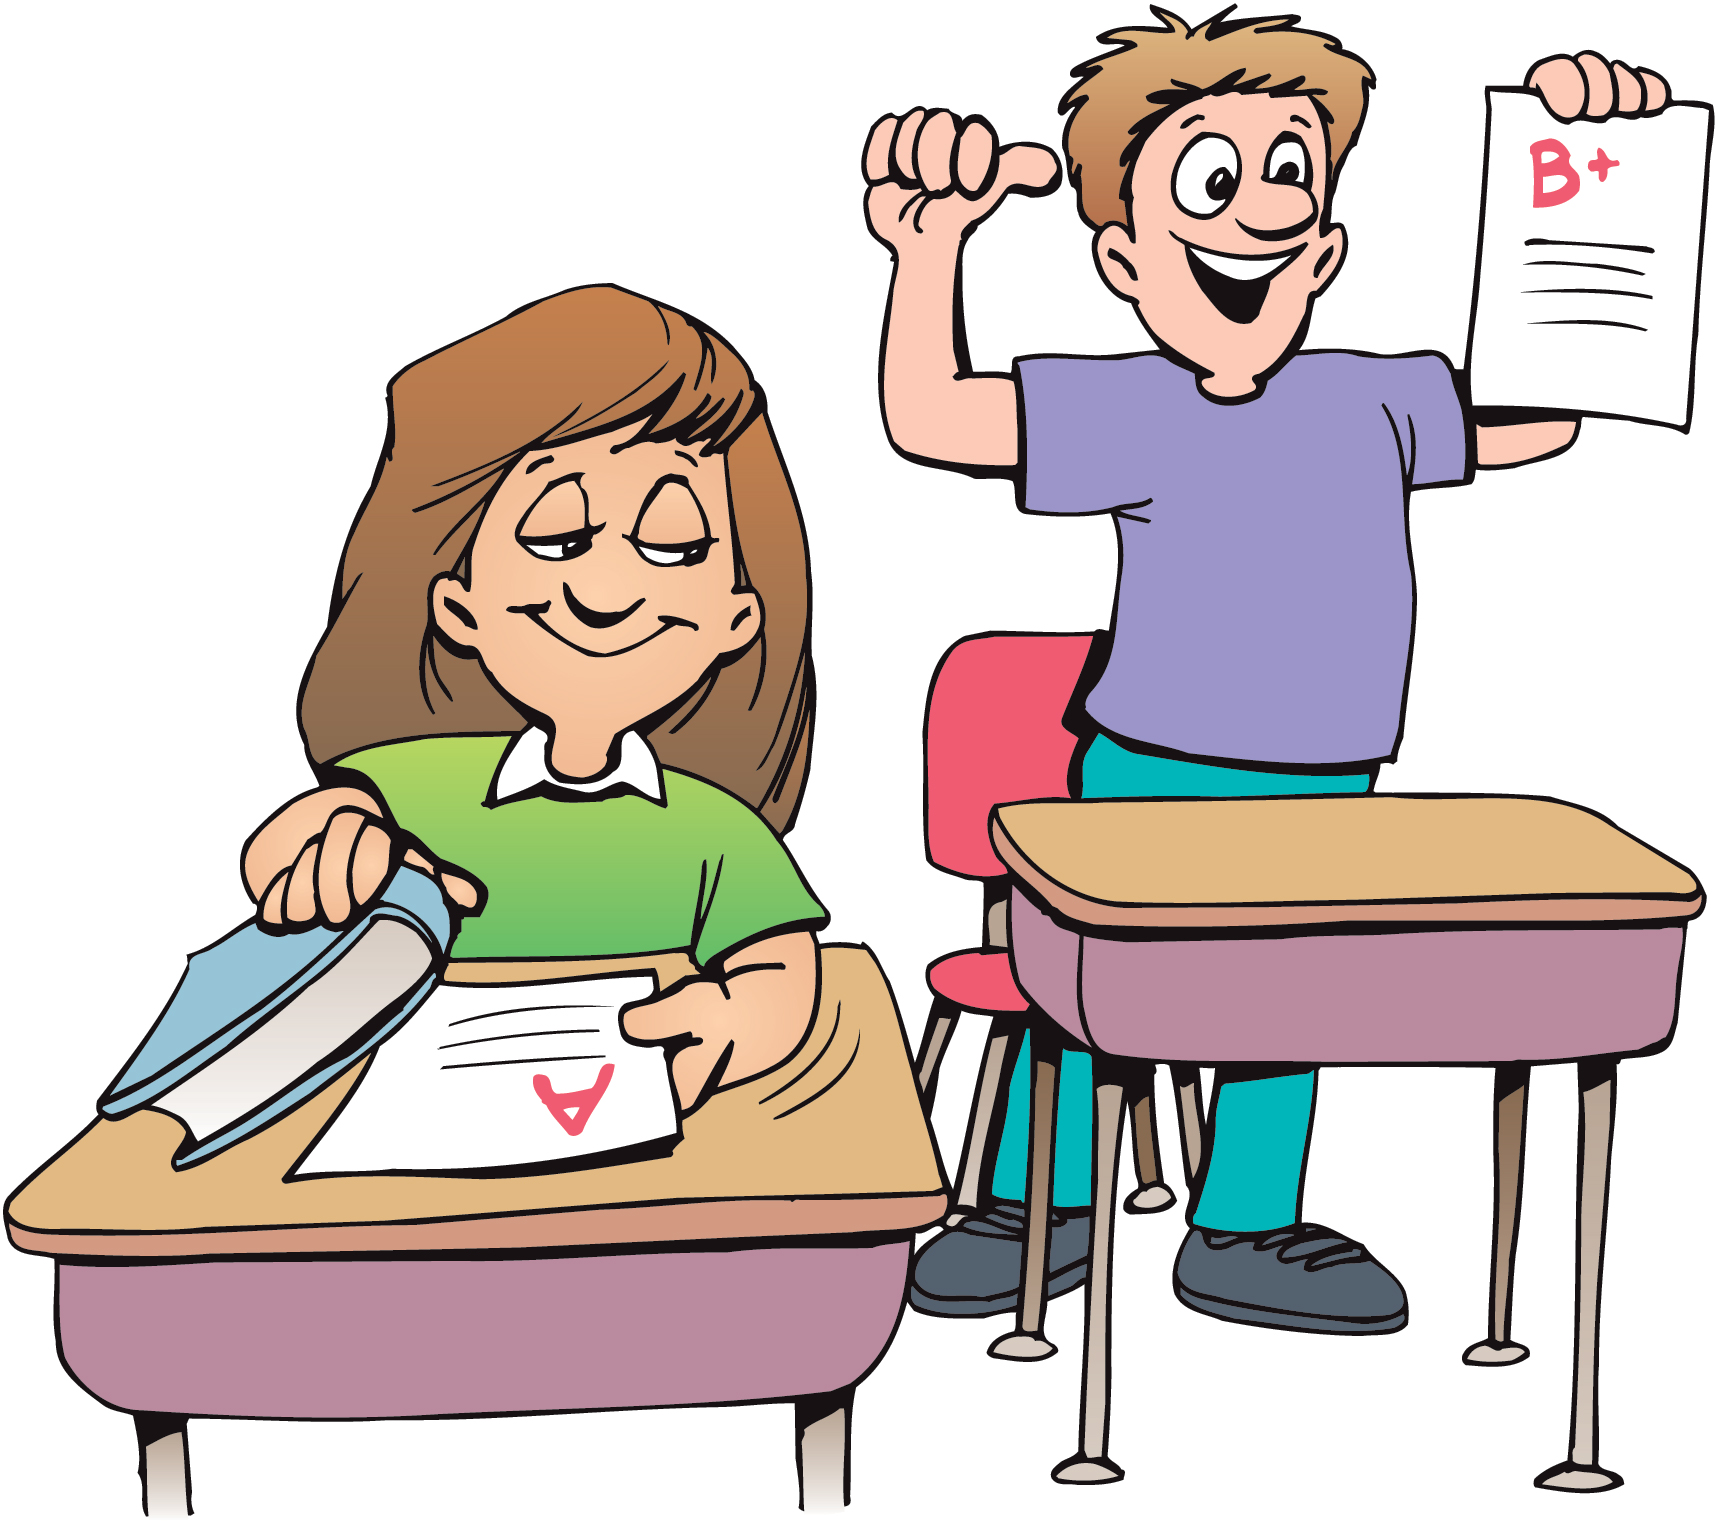 Free Images Of Students In A Classroom, Download Free Images Of ... Elementary School Assembly Clipart